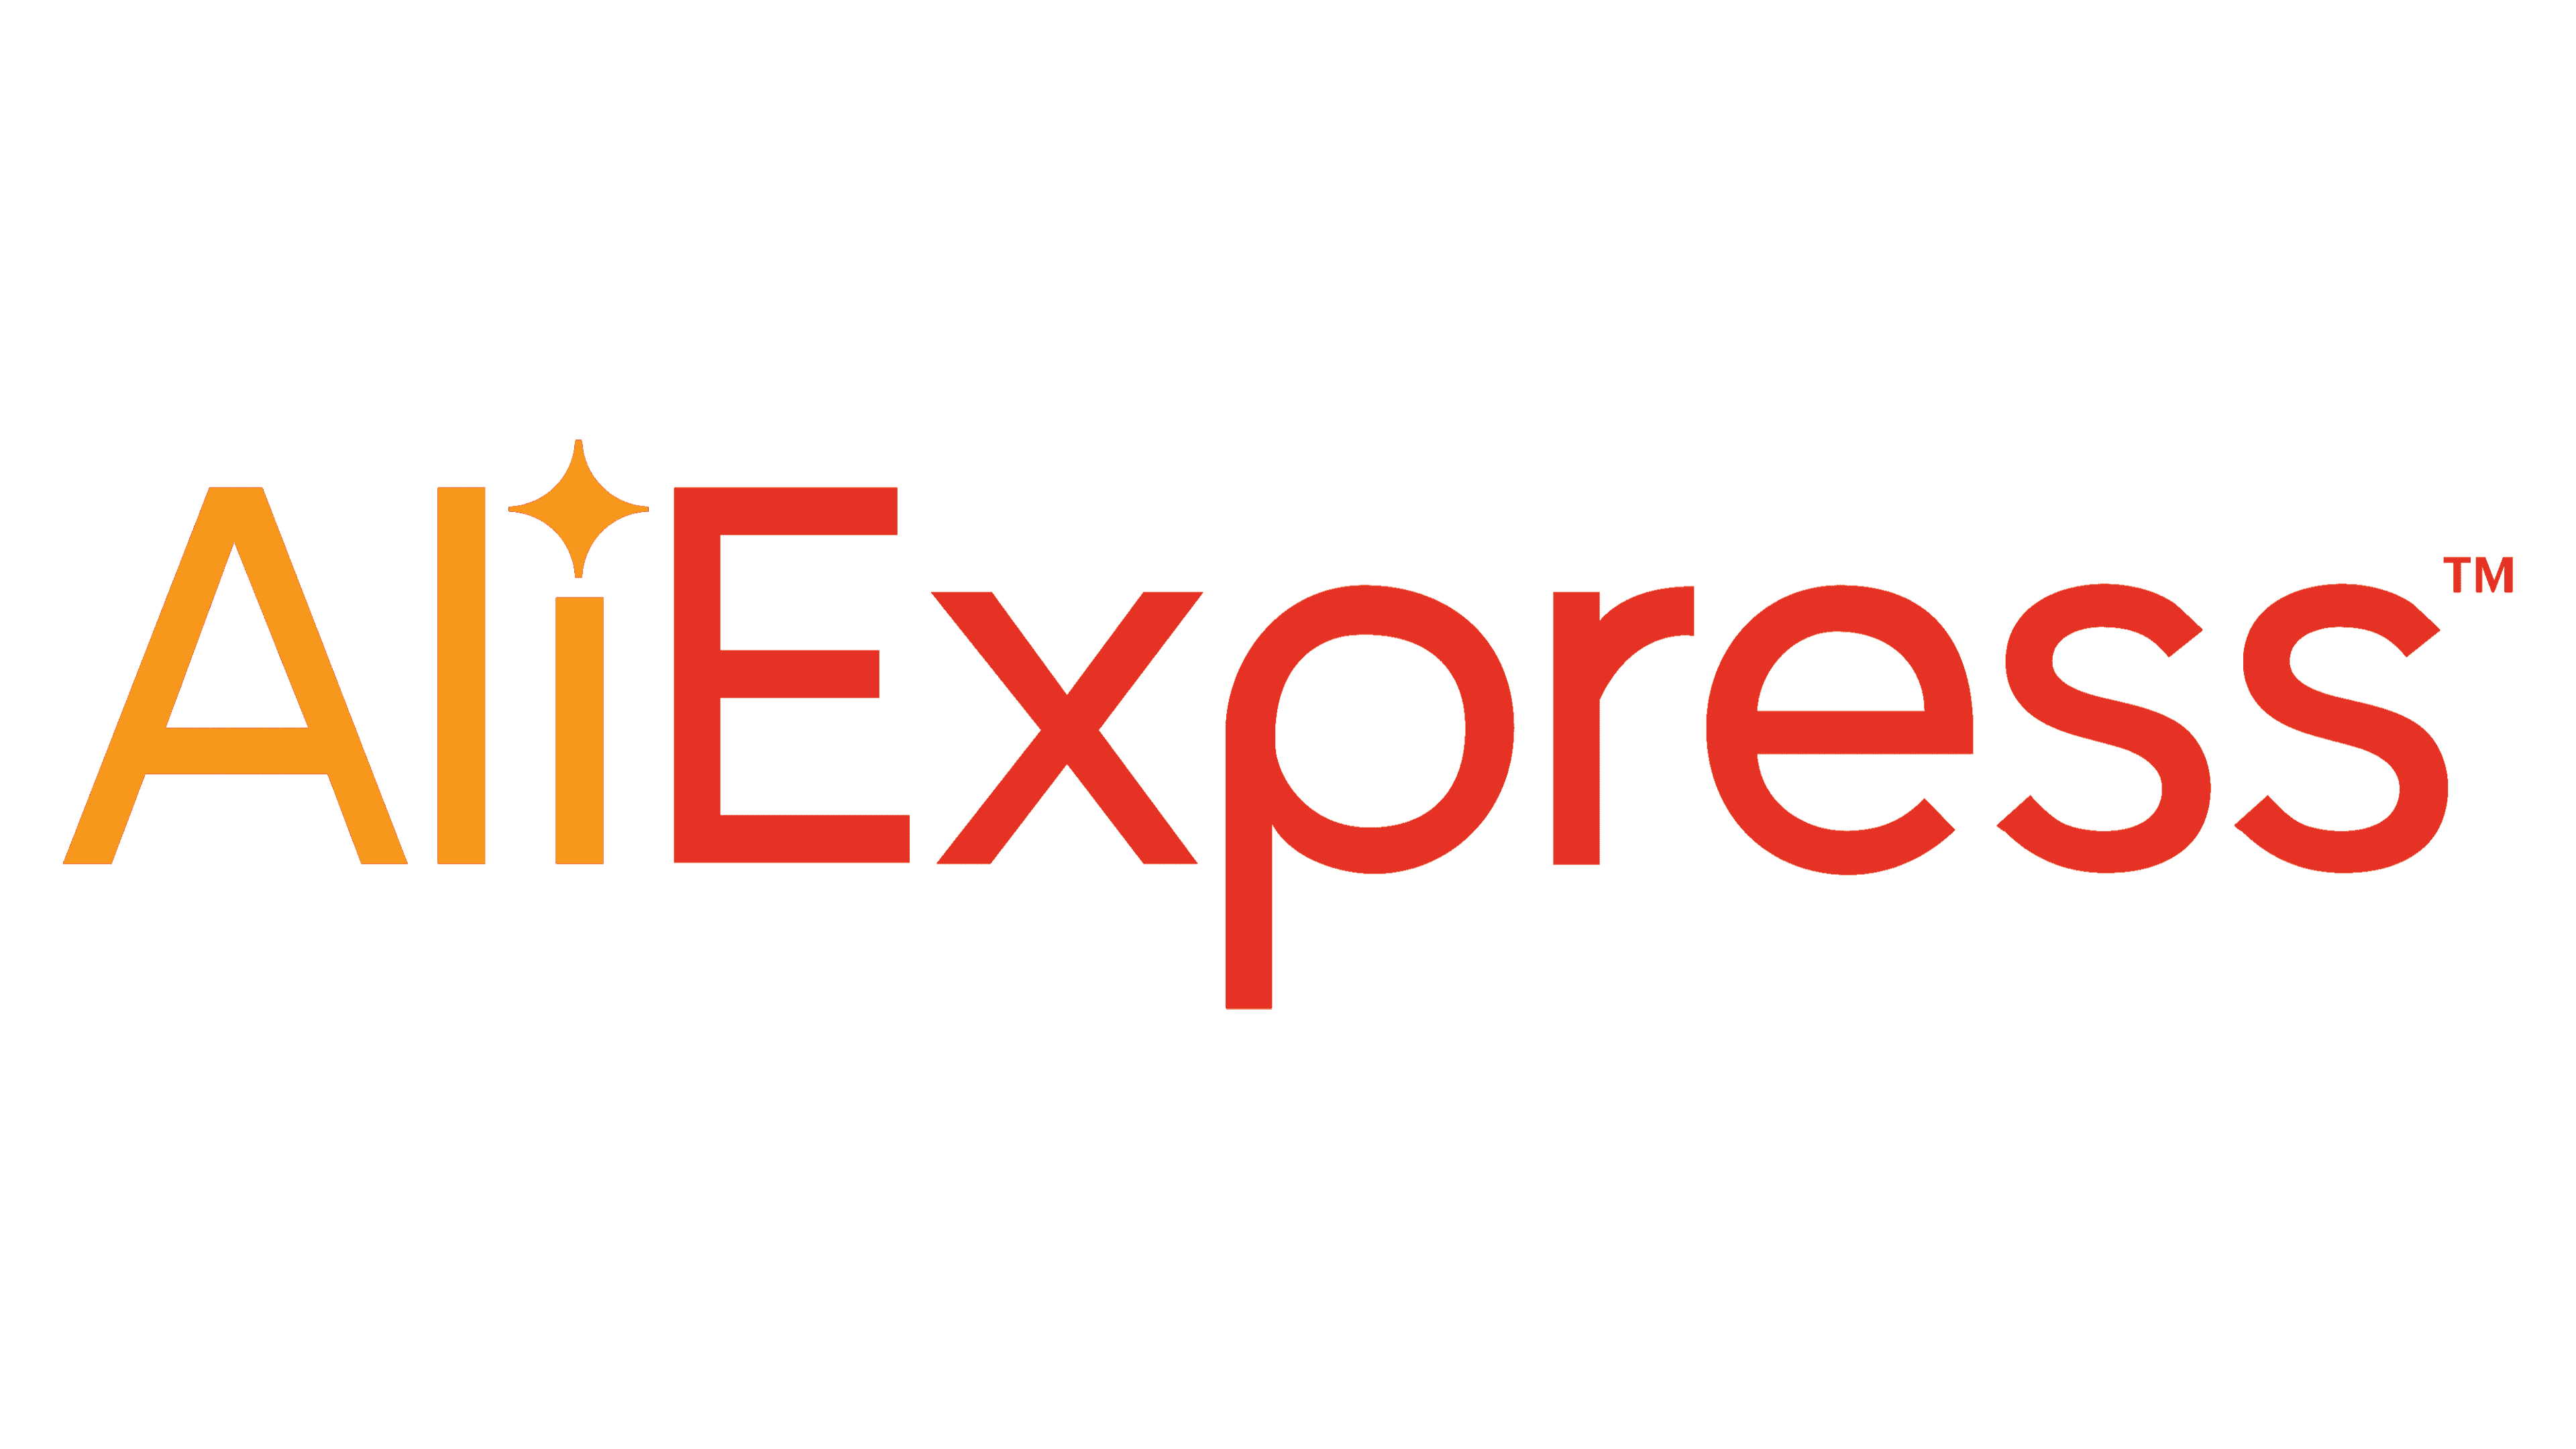 AliExpress Logo and sign, new logo meaning and history, PNG, SVG